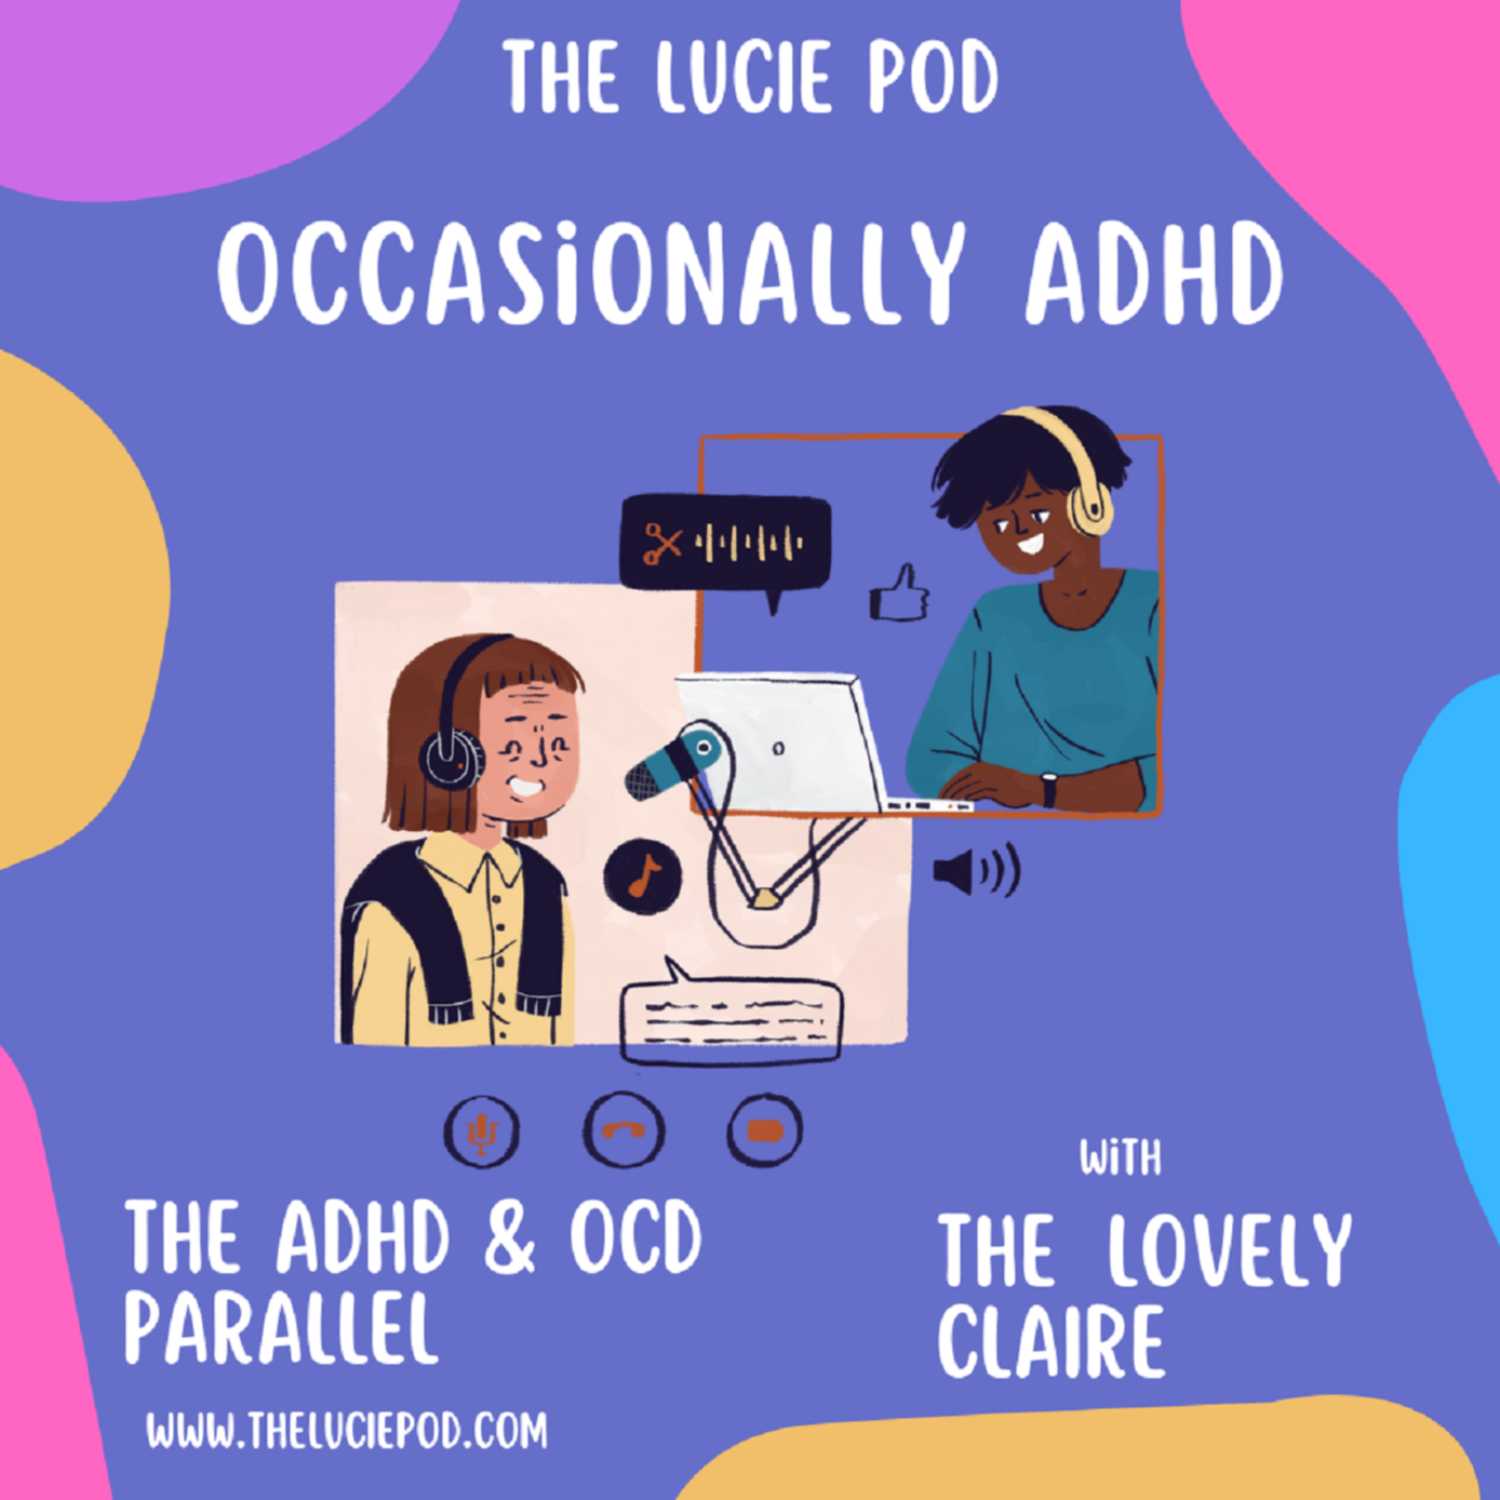 Part 3-Occasionally ADHD: The ADHD & OCD Parallel